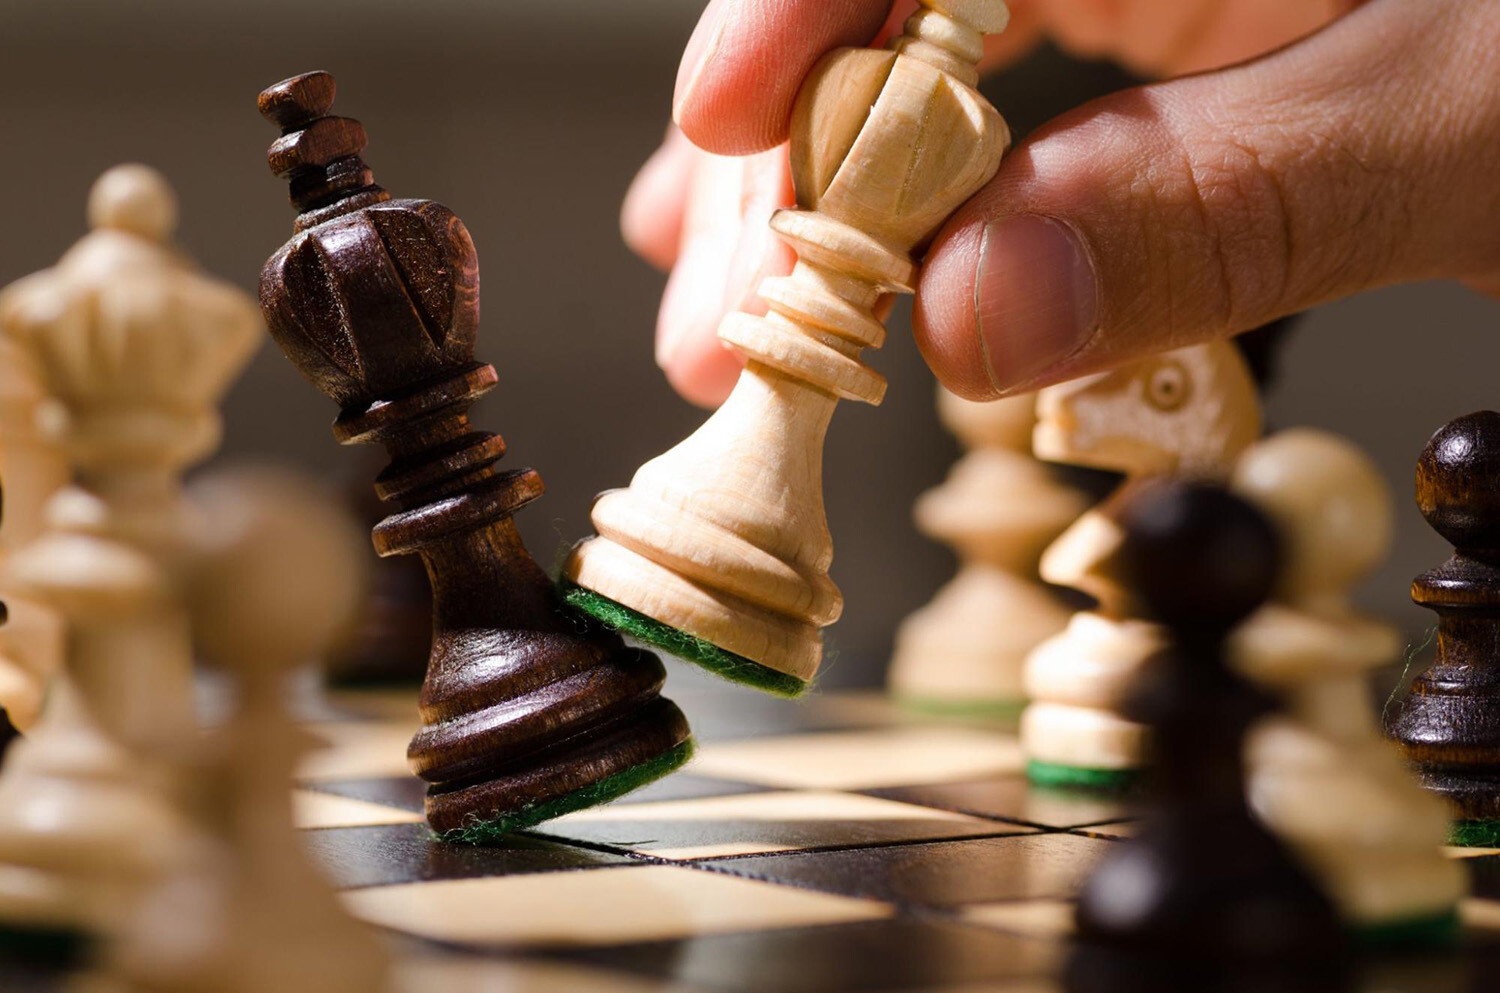 Leave nothing to chance. Get familiar with chess essentials before making your first move!